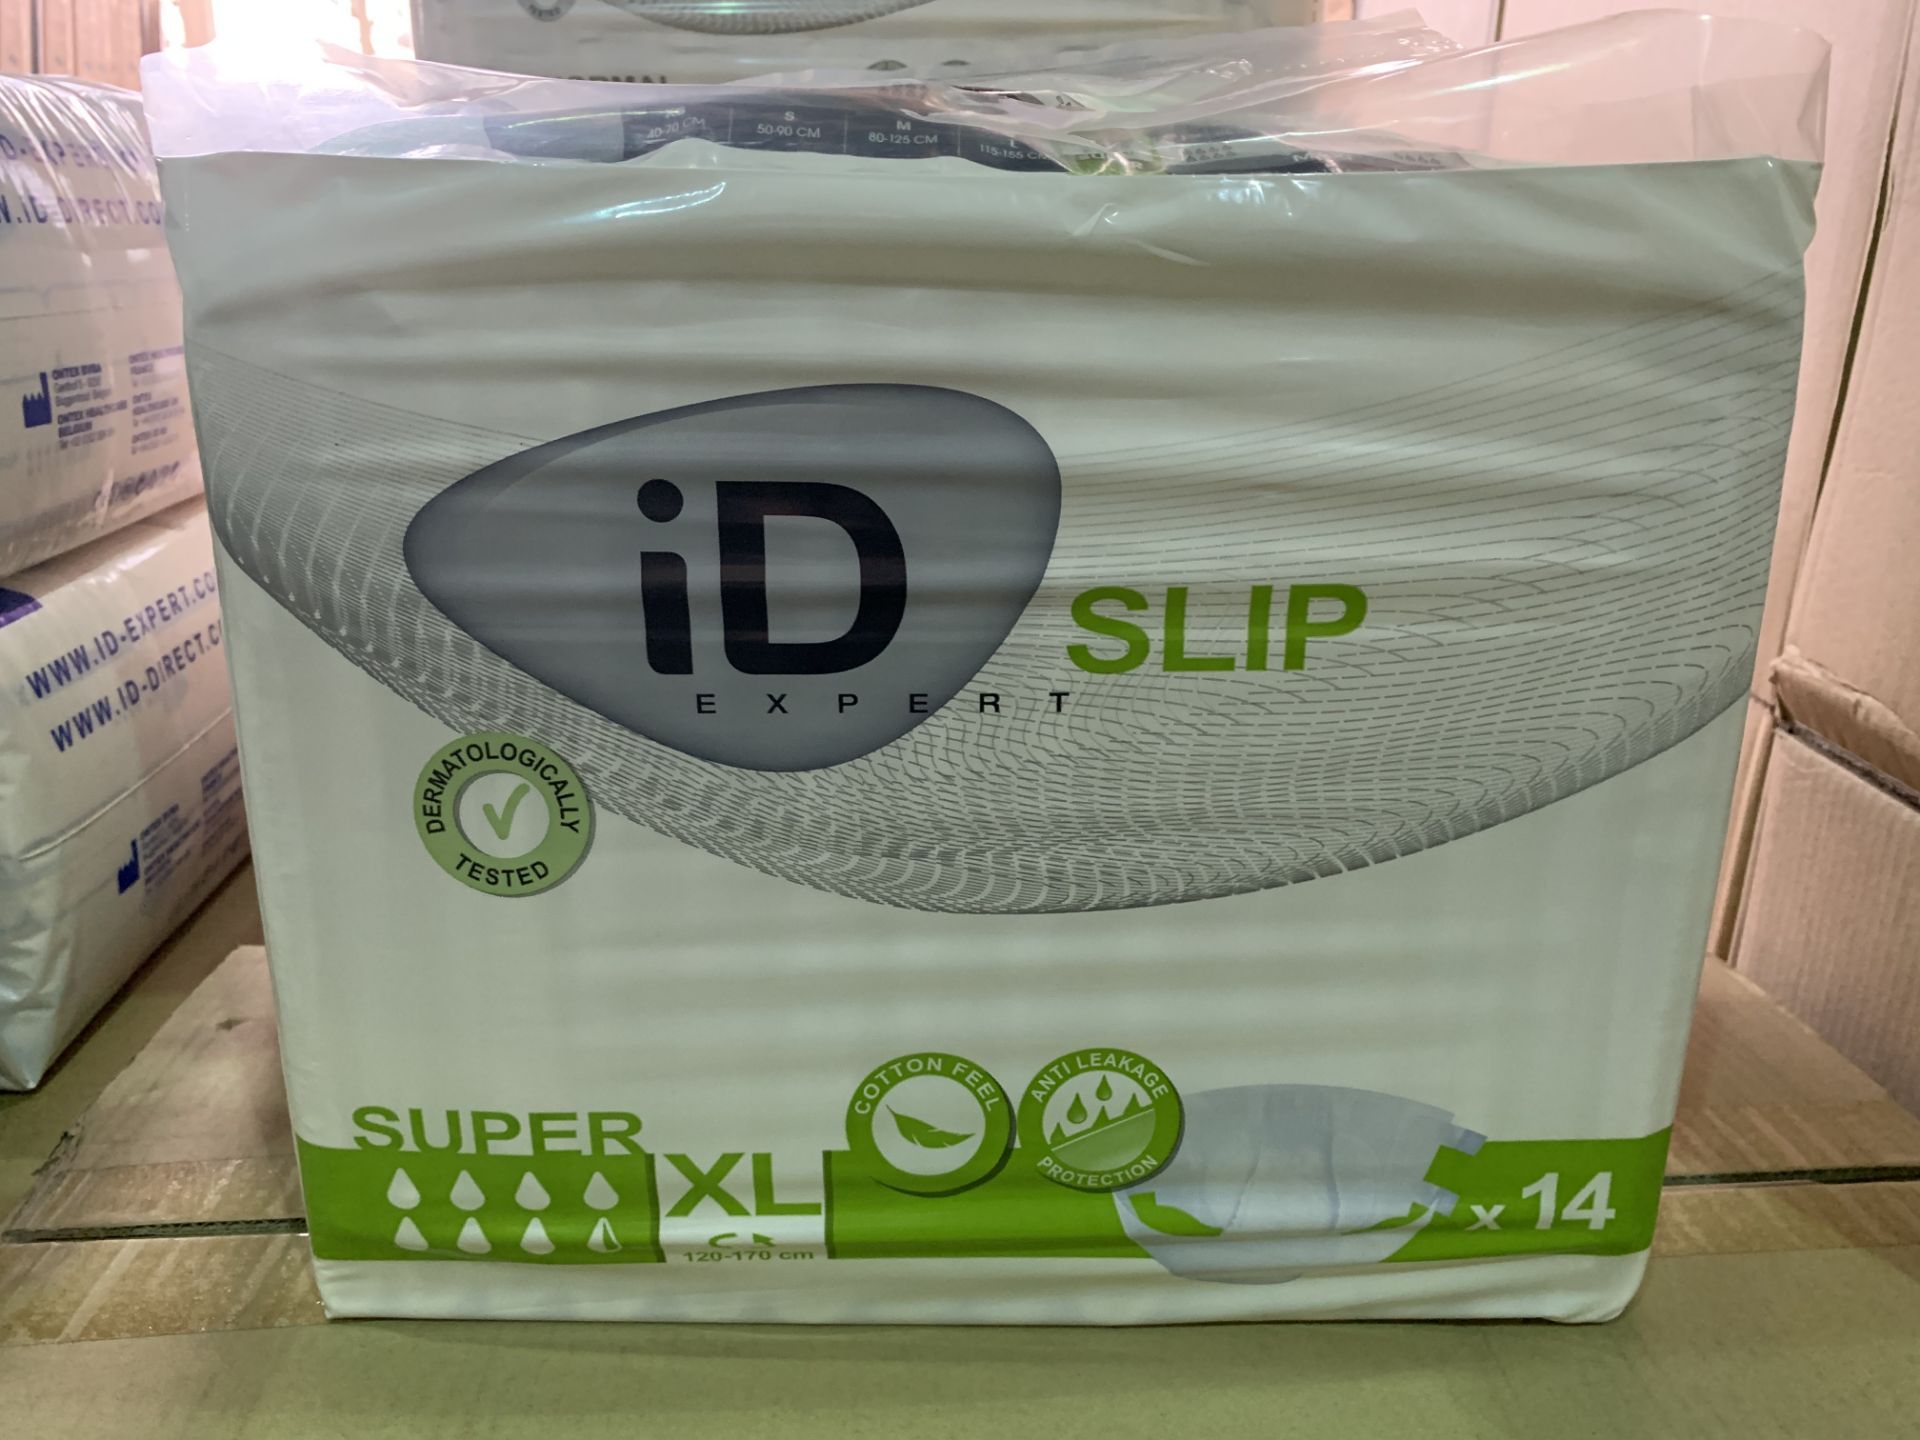 8 X PACKS OF 14 ID SLIP EXPERT SUPER XL PADS IN 2 BOXES (575/27)